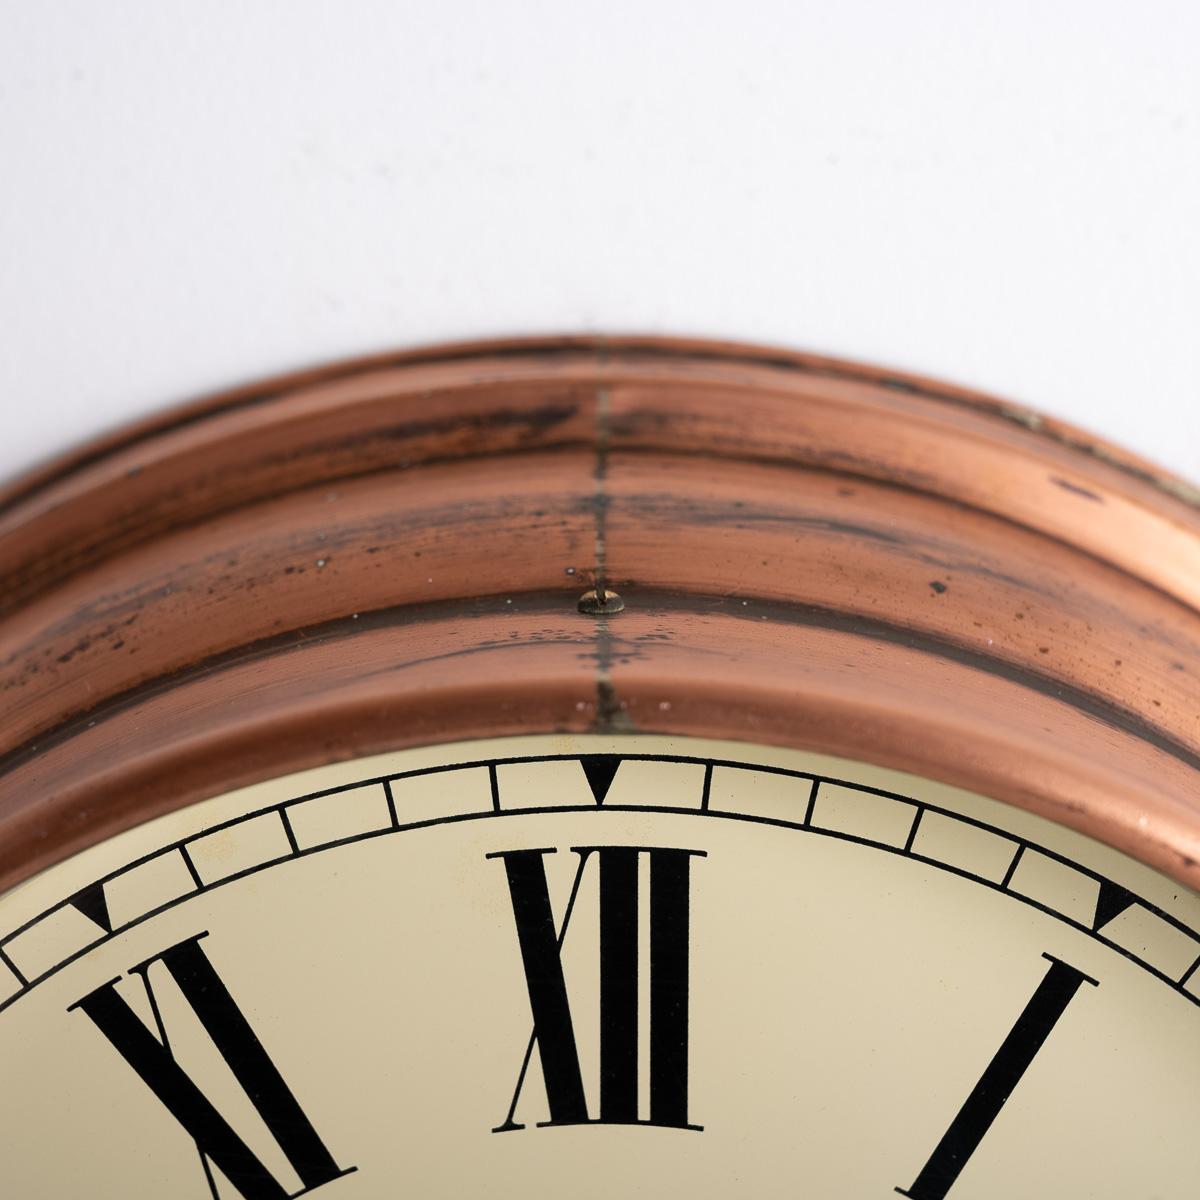 Reclaimed Industrial Aged Spun Copper Case Wall Clock By Synchronome 12